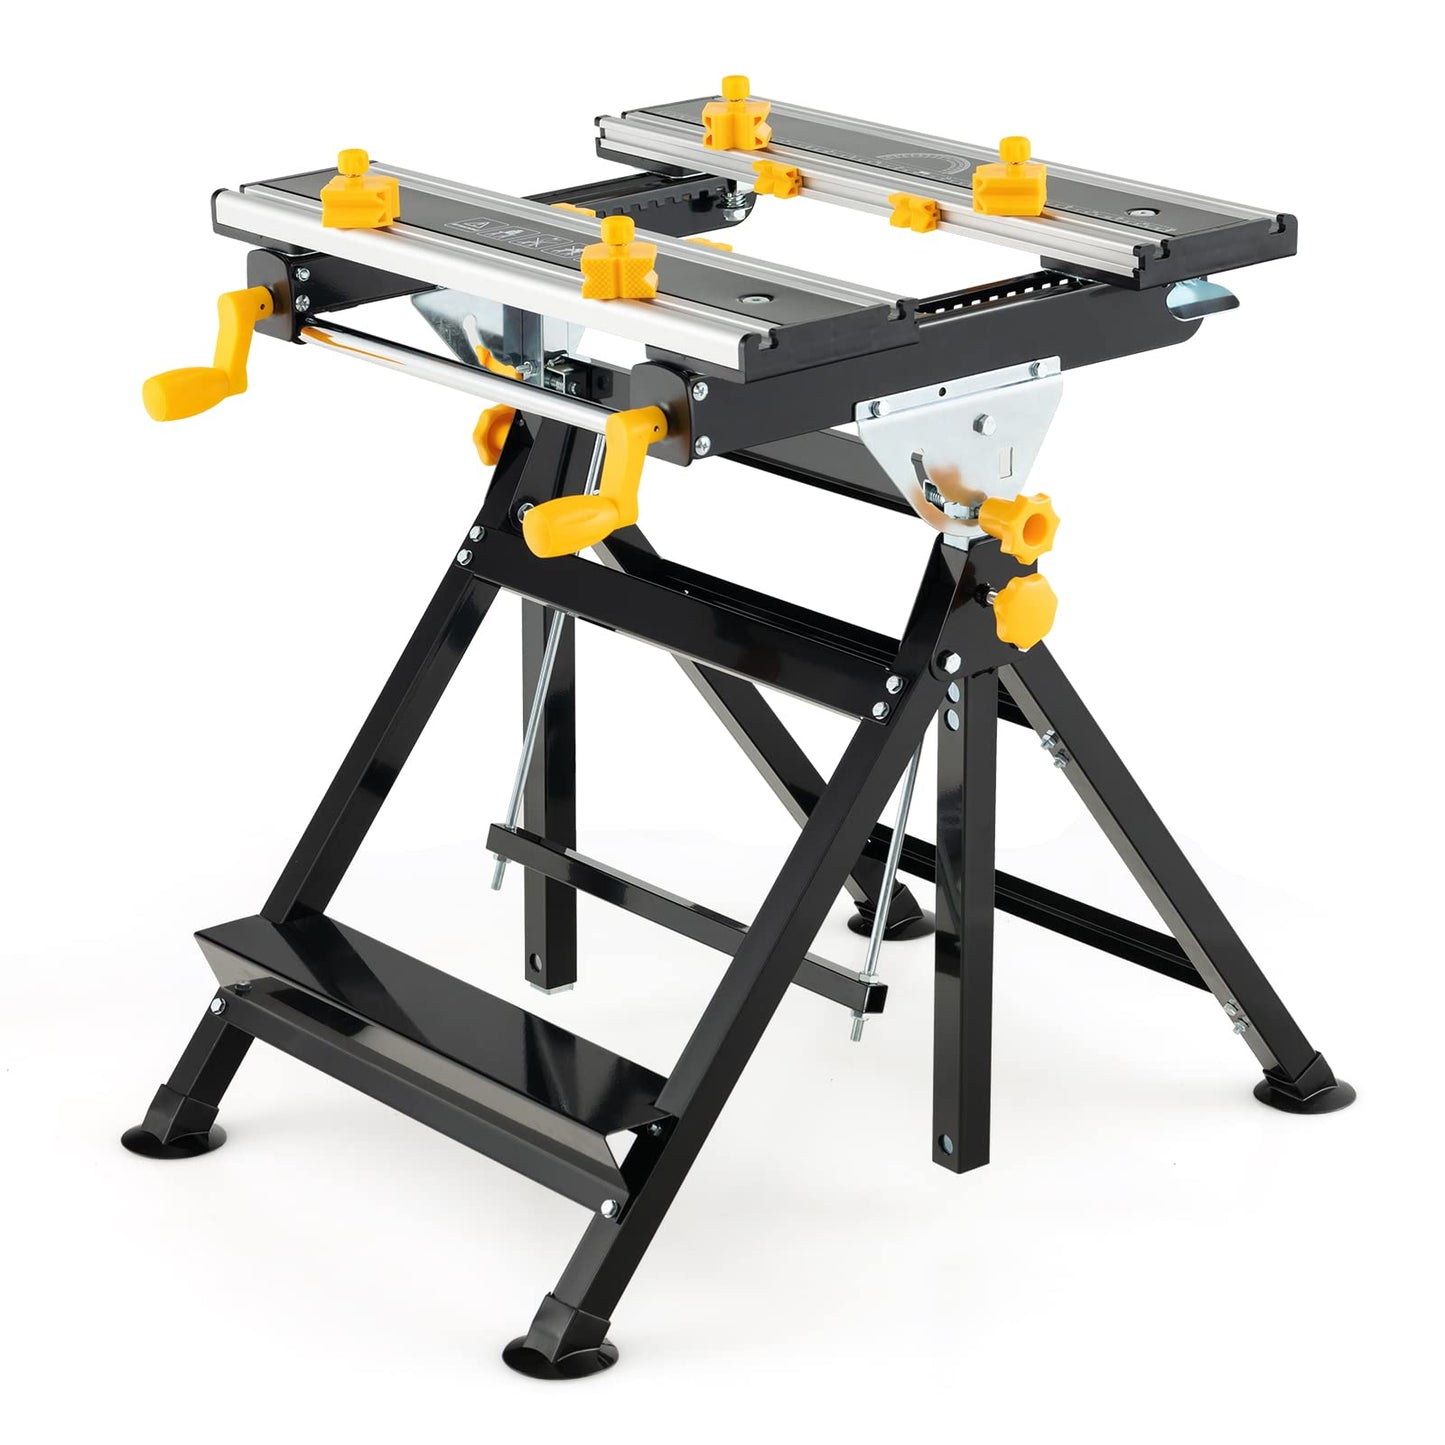 S AFSTAR Folding Work Table, Portable Workstation with Tiltable & Extendable Tabletop, 8 Sliding Non-marring Clamps & 2 Clamping Handles, 7-Level